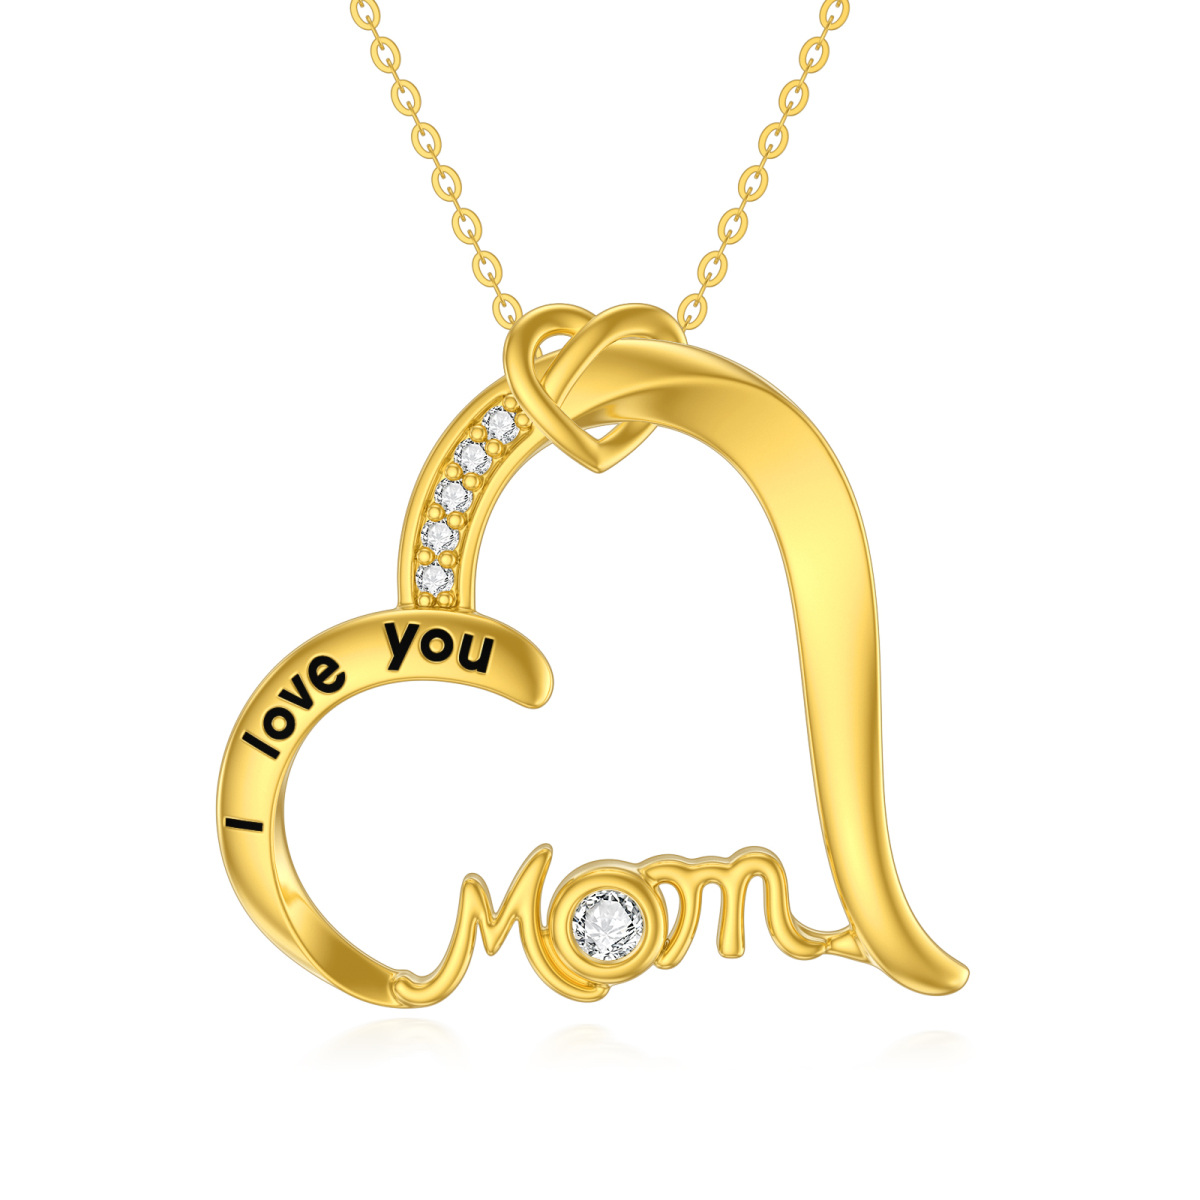 14K Gold Circular Shaped Cubic Zirconia Heart Pendant Necklace with Engraved Word-1